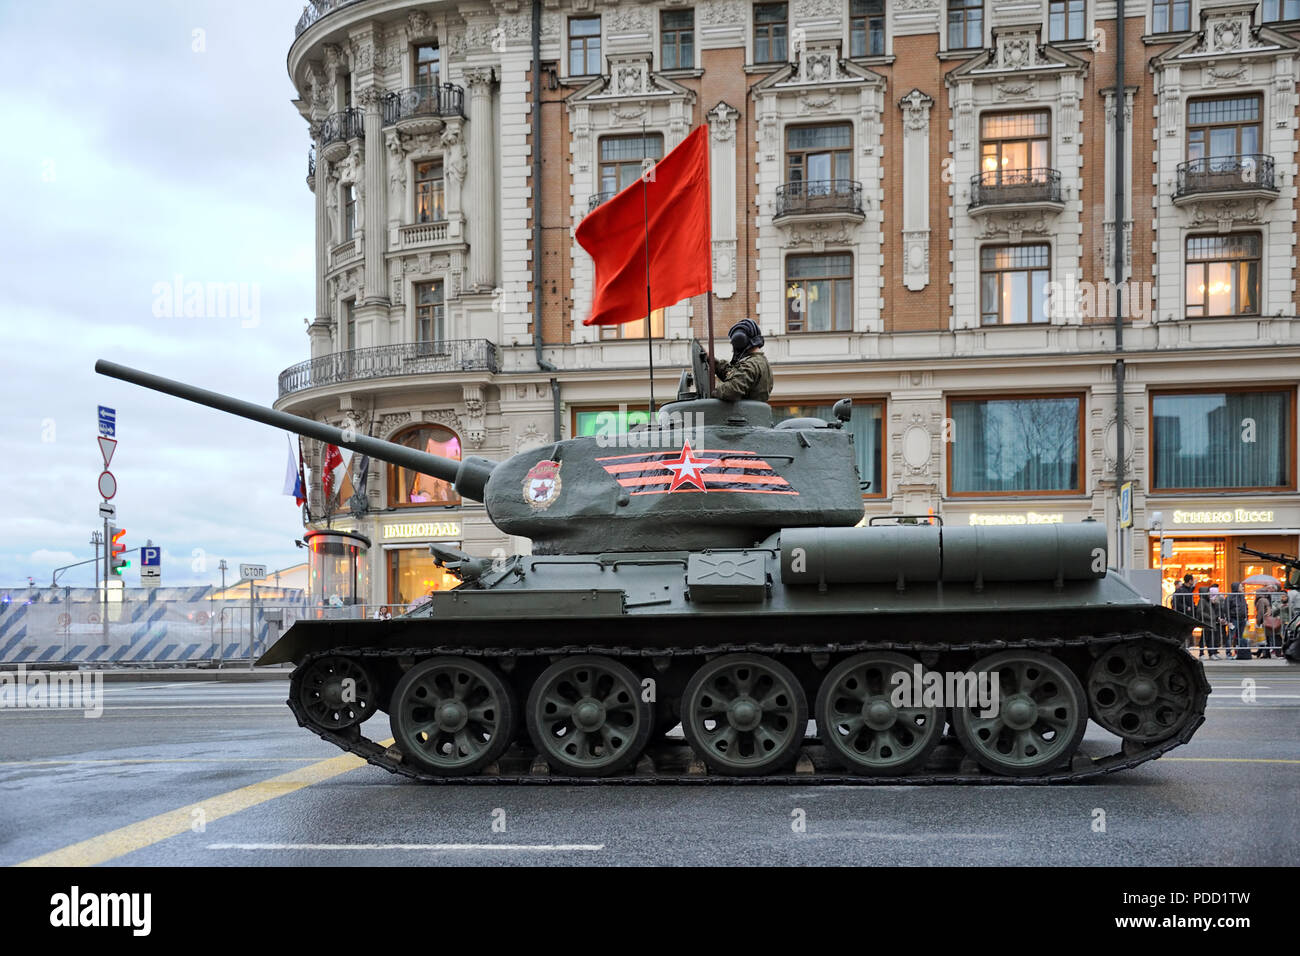 = Legendary T-34 Tank with Waving Red Banner =  Soviet T-34 tank with waving red banner at the beginning of Tverskaya street in the background of hote Stock Photo